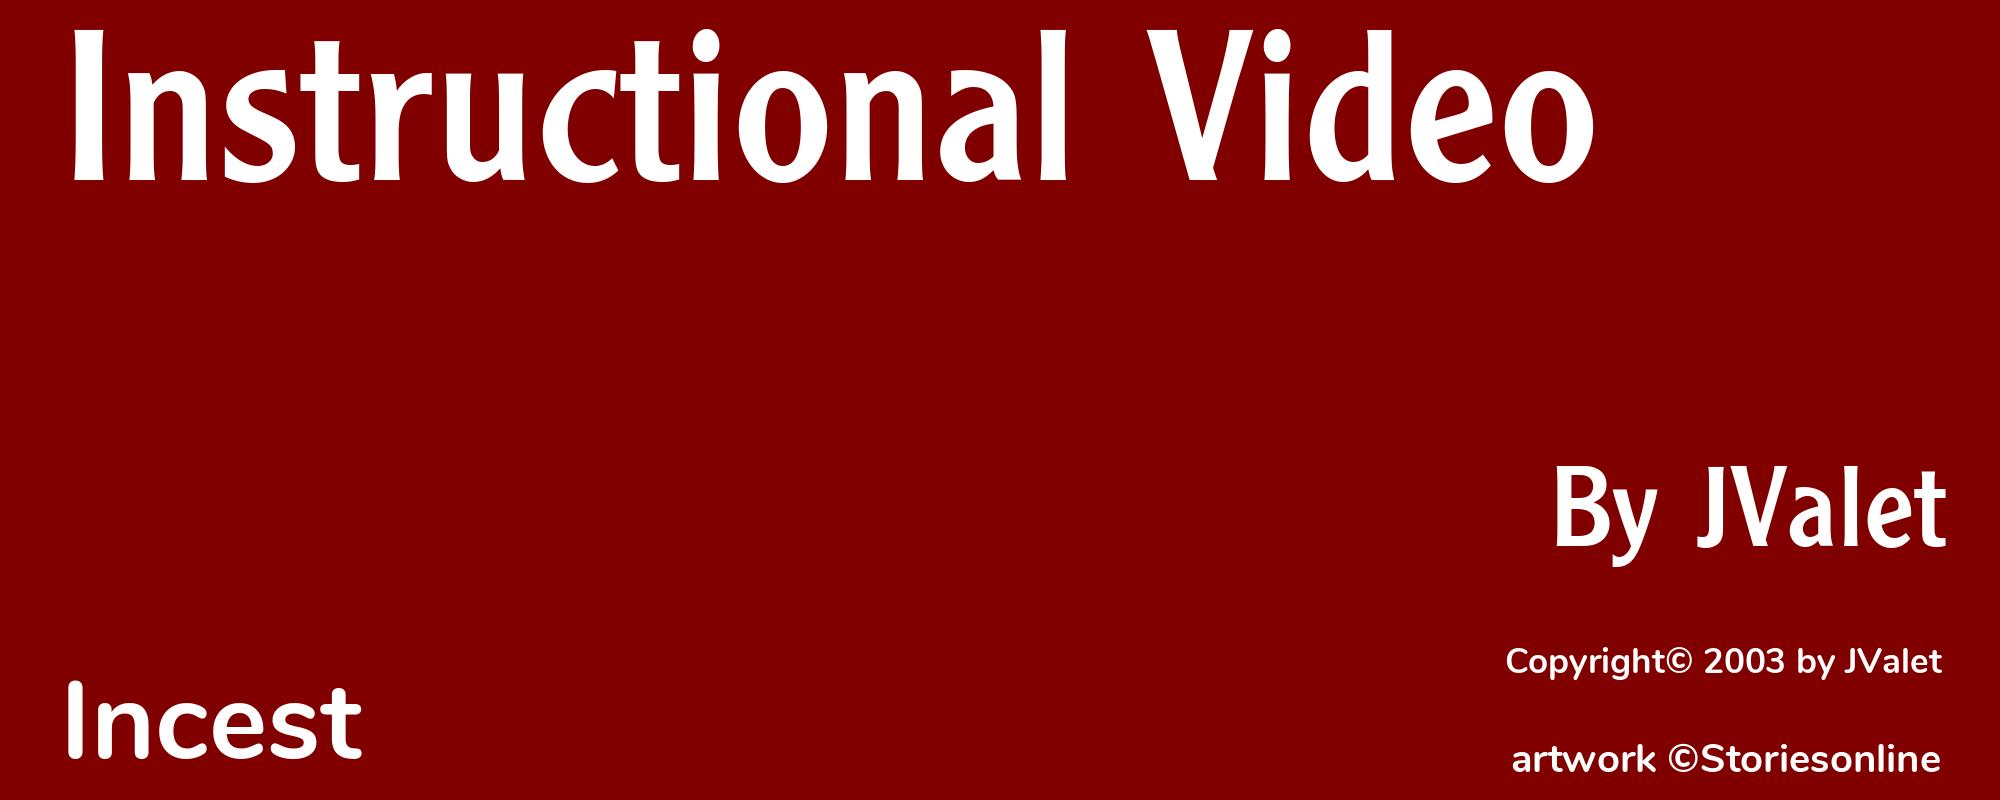 Instructional Video - Cover